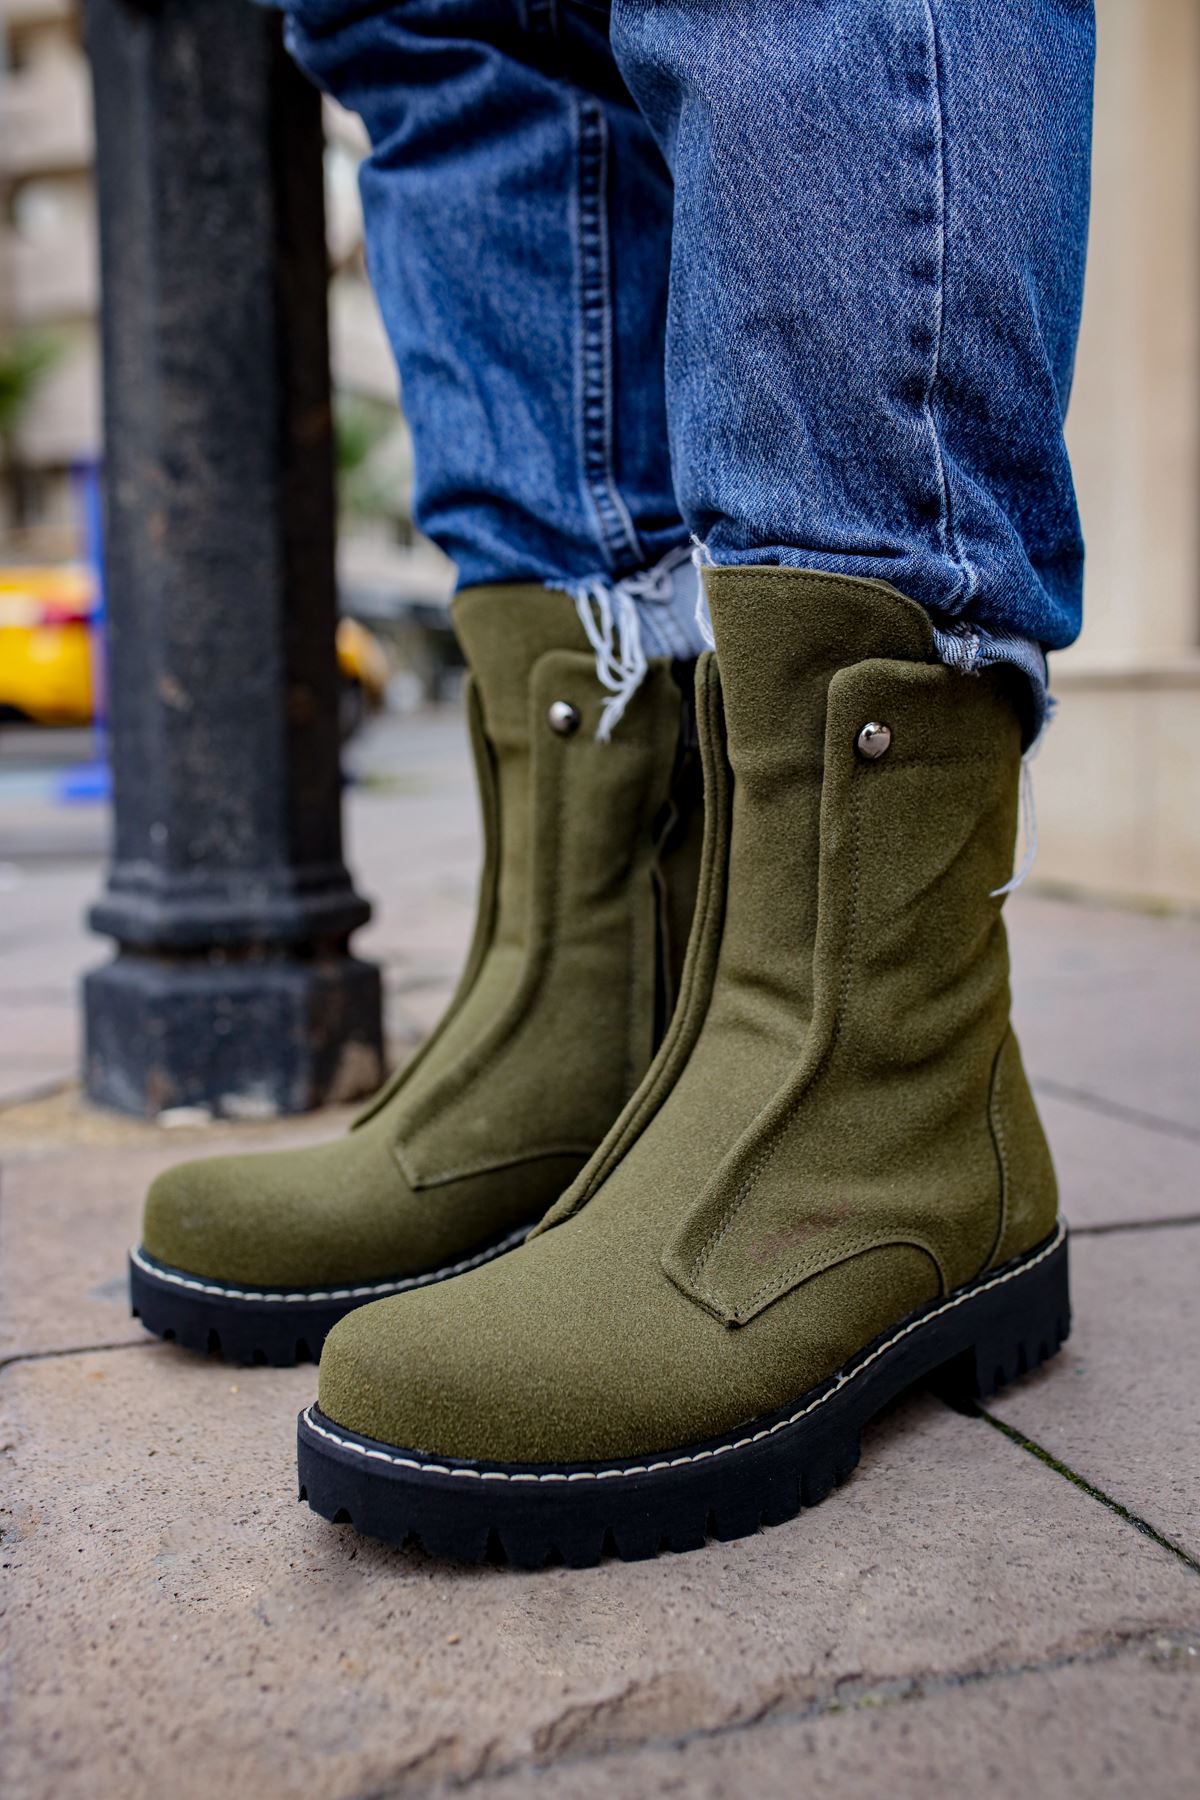 CH027 Men's Suede Khaki-Black Sole Casual Winter Boots - STREETMODE ™